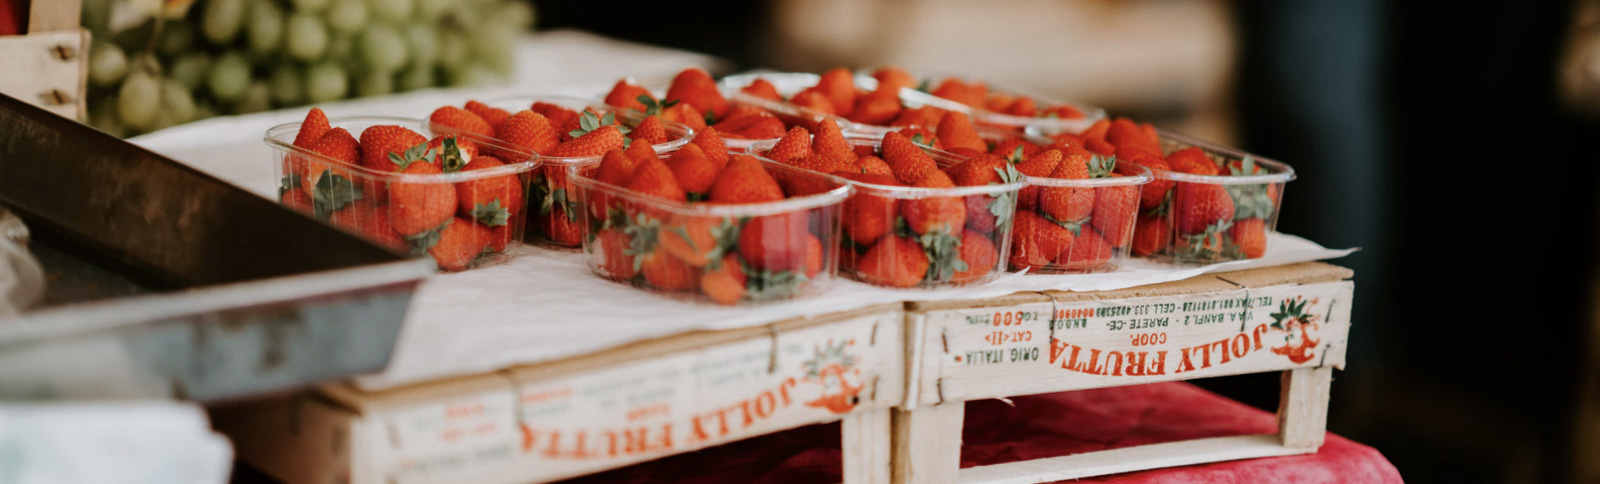 Strawberries in boxes